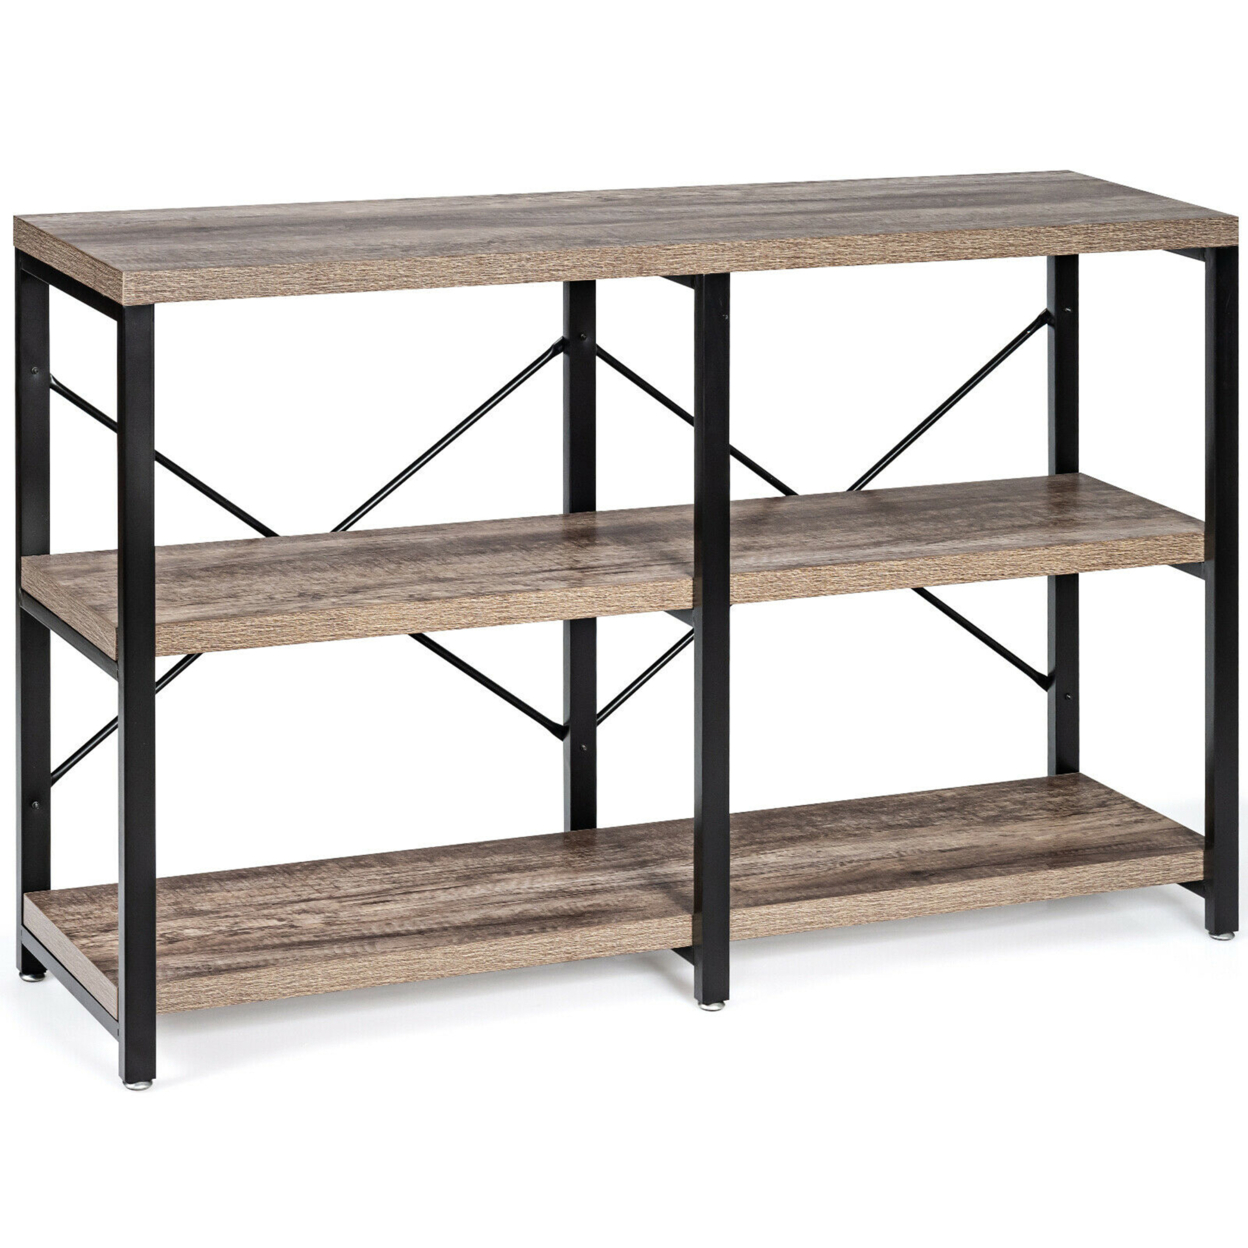 47'' Console Table 3 Tier Industrial Sofa Table Metal Frame - Gray Oak